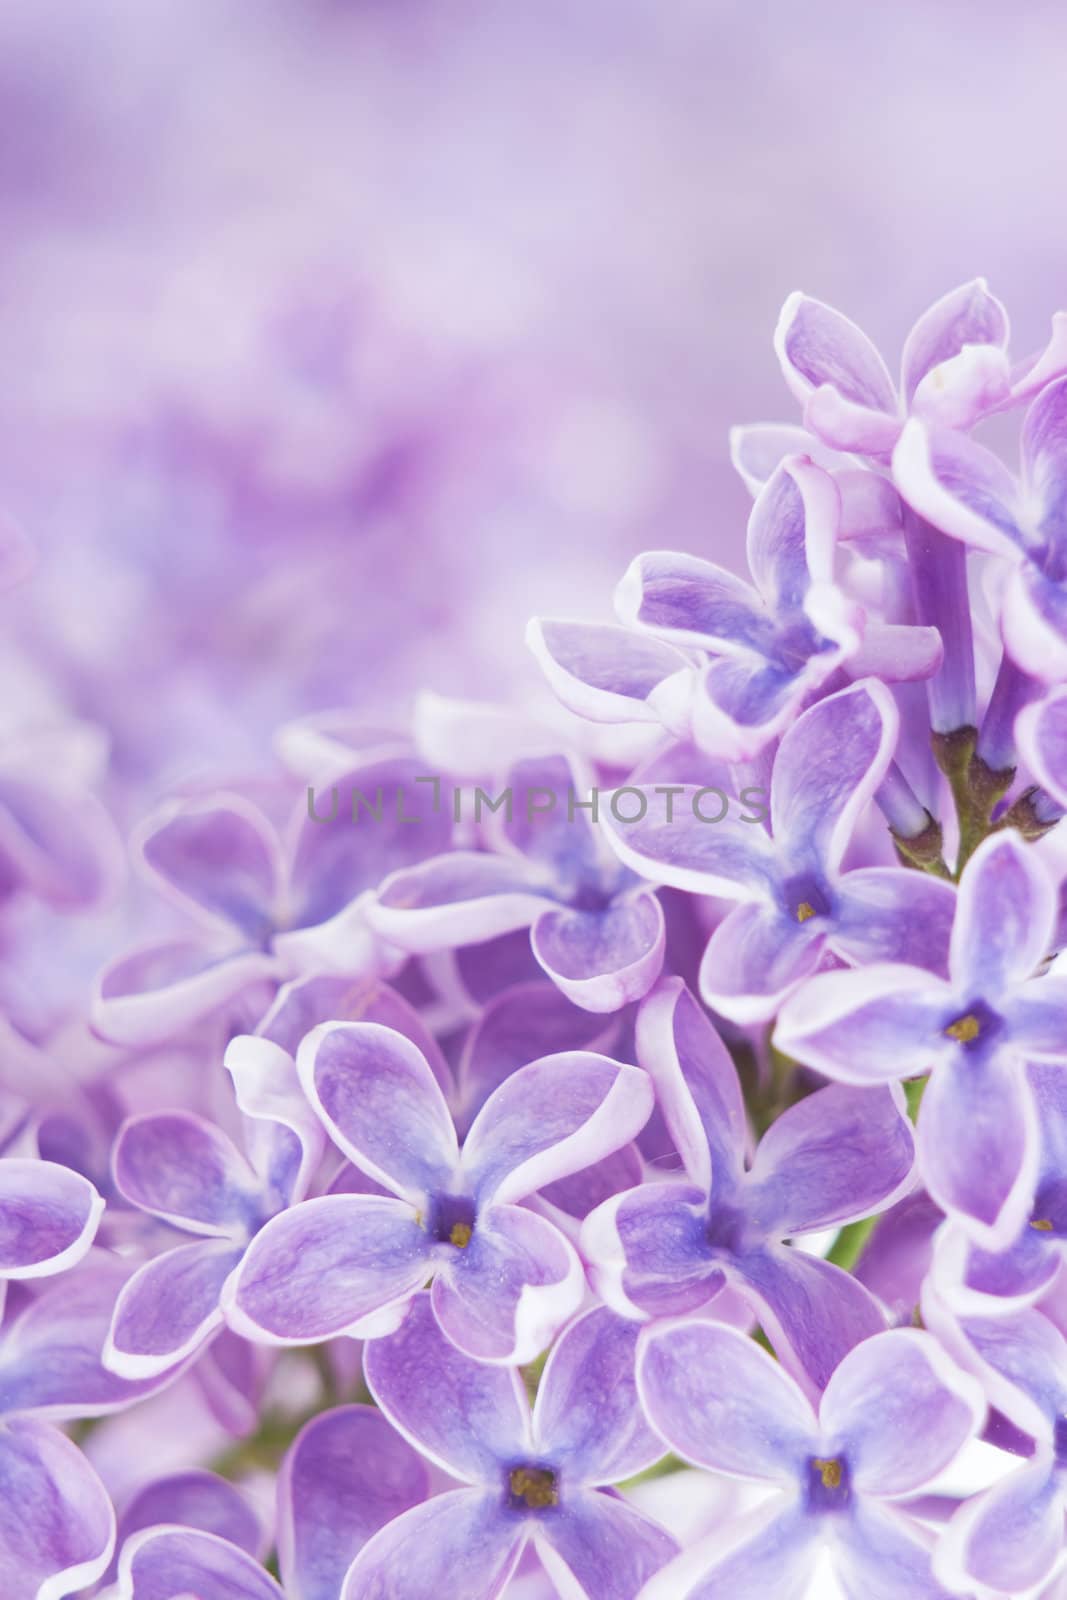 Blooming lilac flowers. Abstract background. Macro photo.